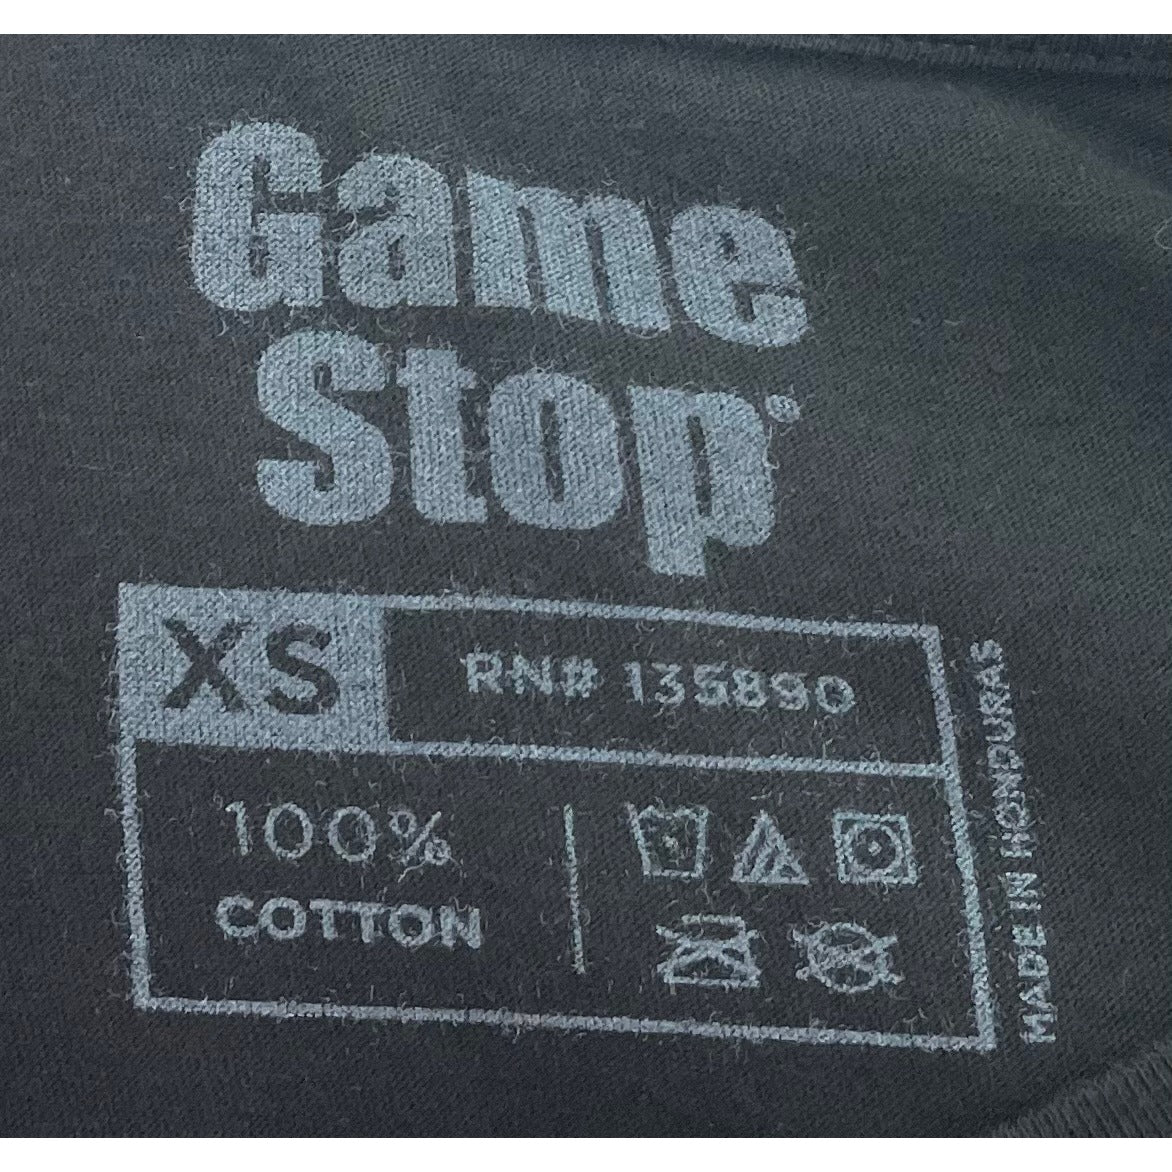 Game Stop Men's Size XS Black/White/Red "Game Stop Graphic T-Shirt